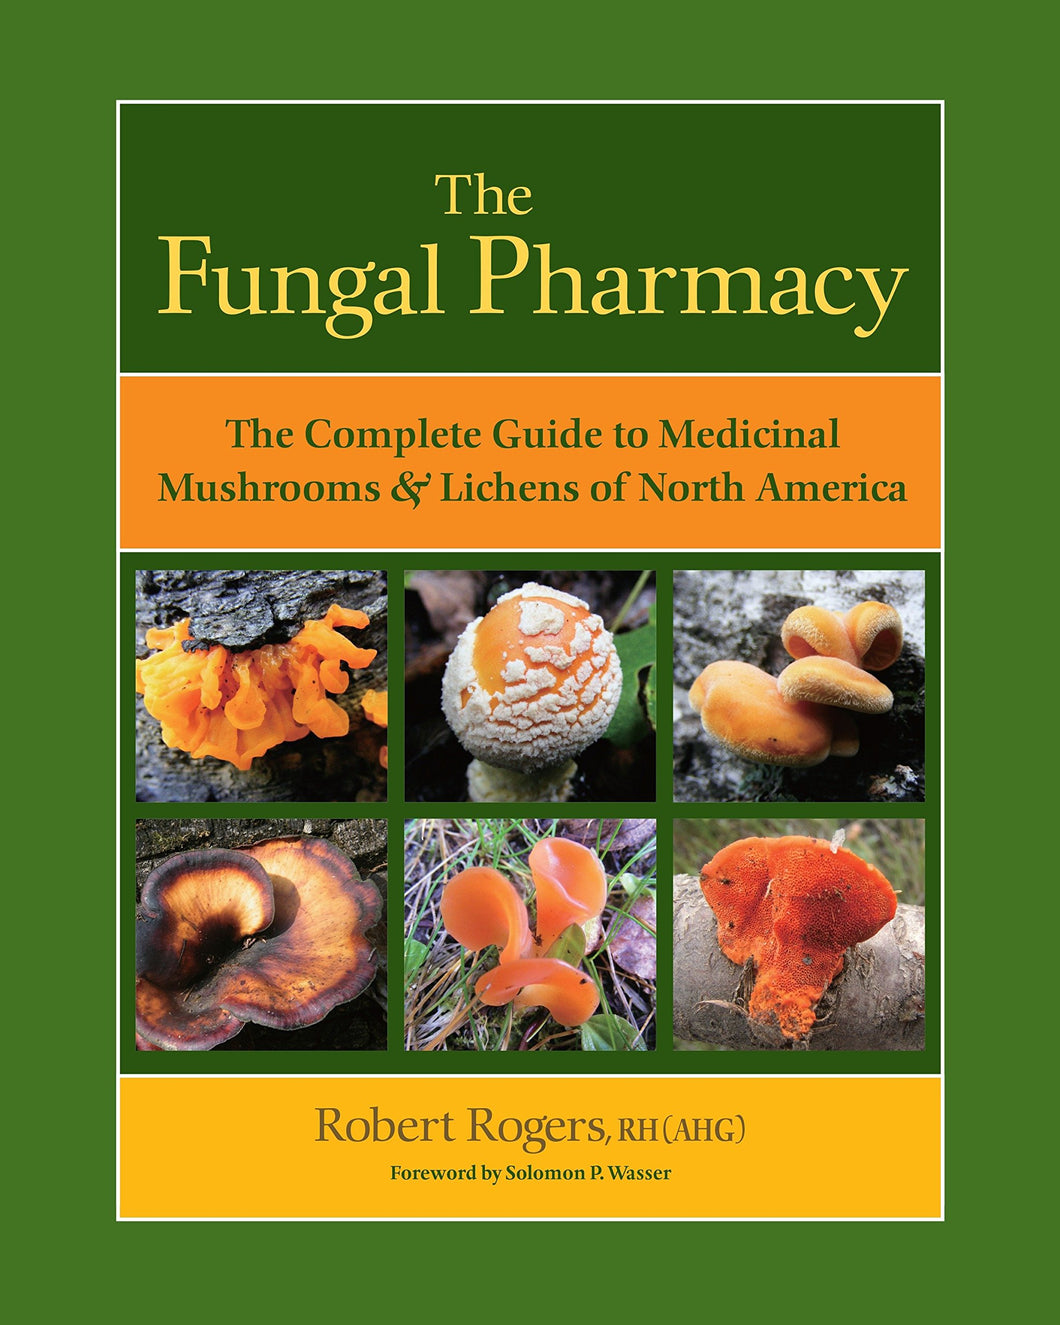 The Fungal Pharmacy: The Complete Guide to Medicinal Mushrooms and Lichens of North America [by Robert Rogers]